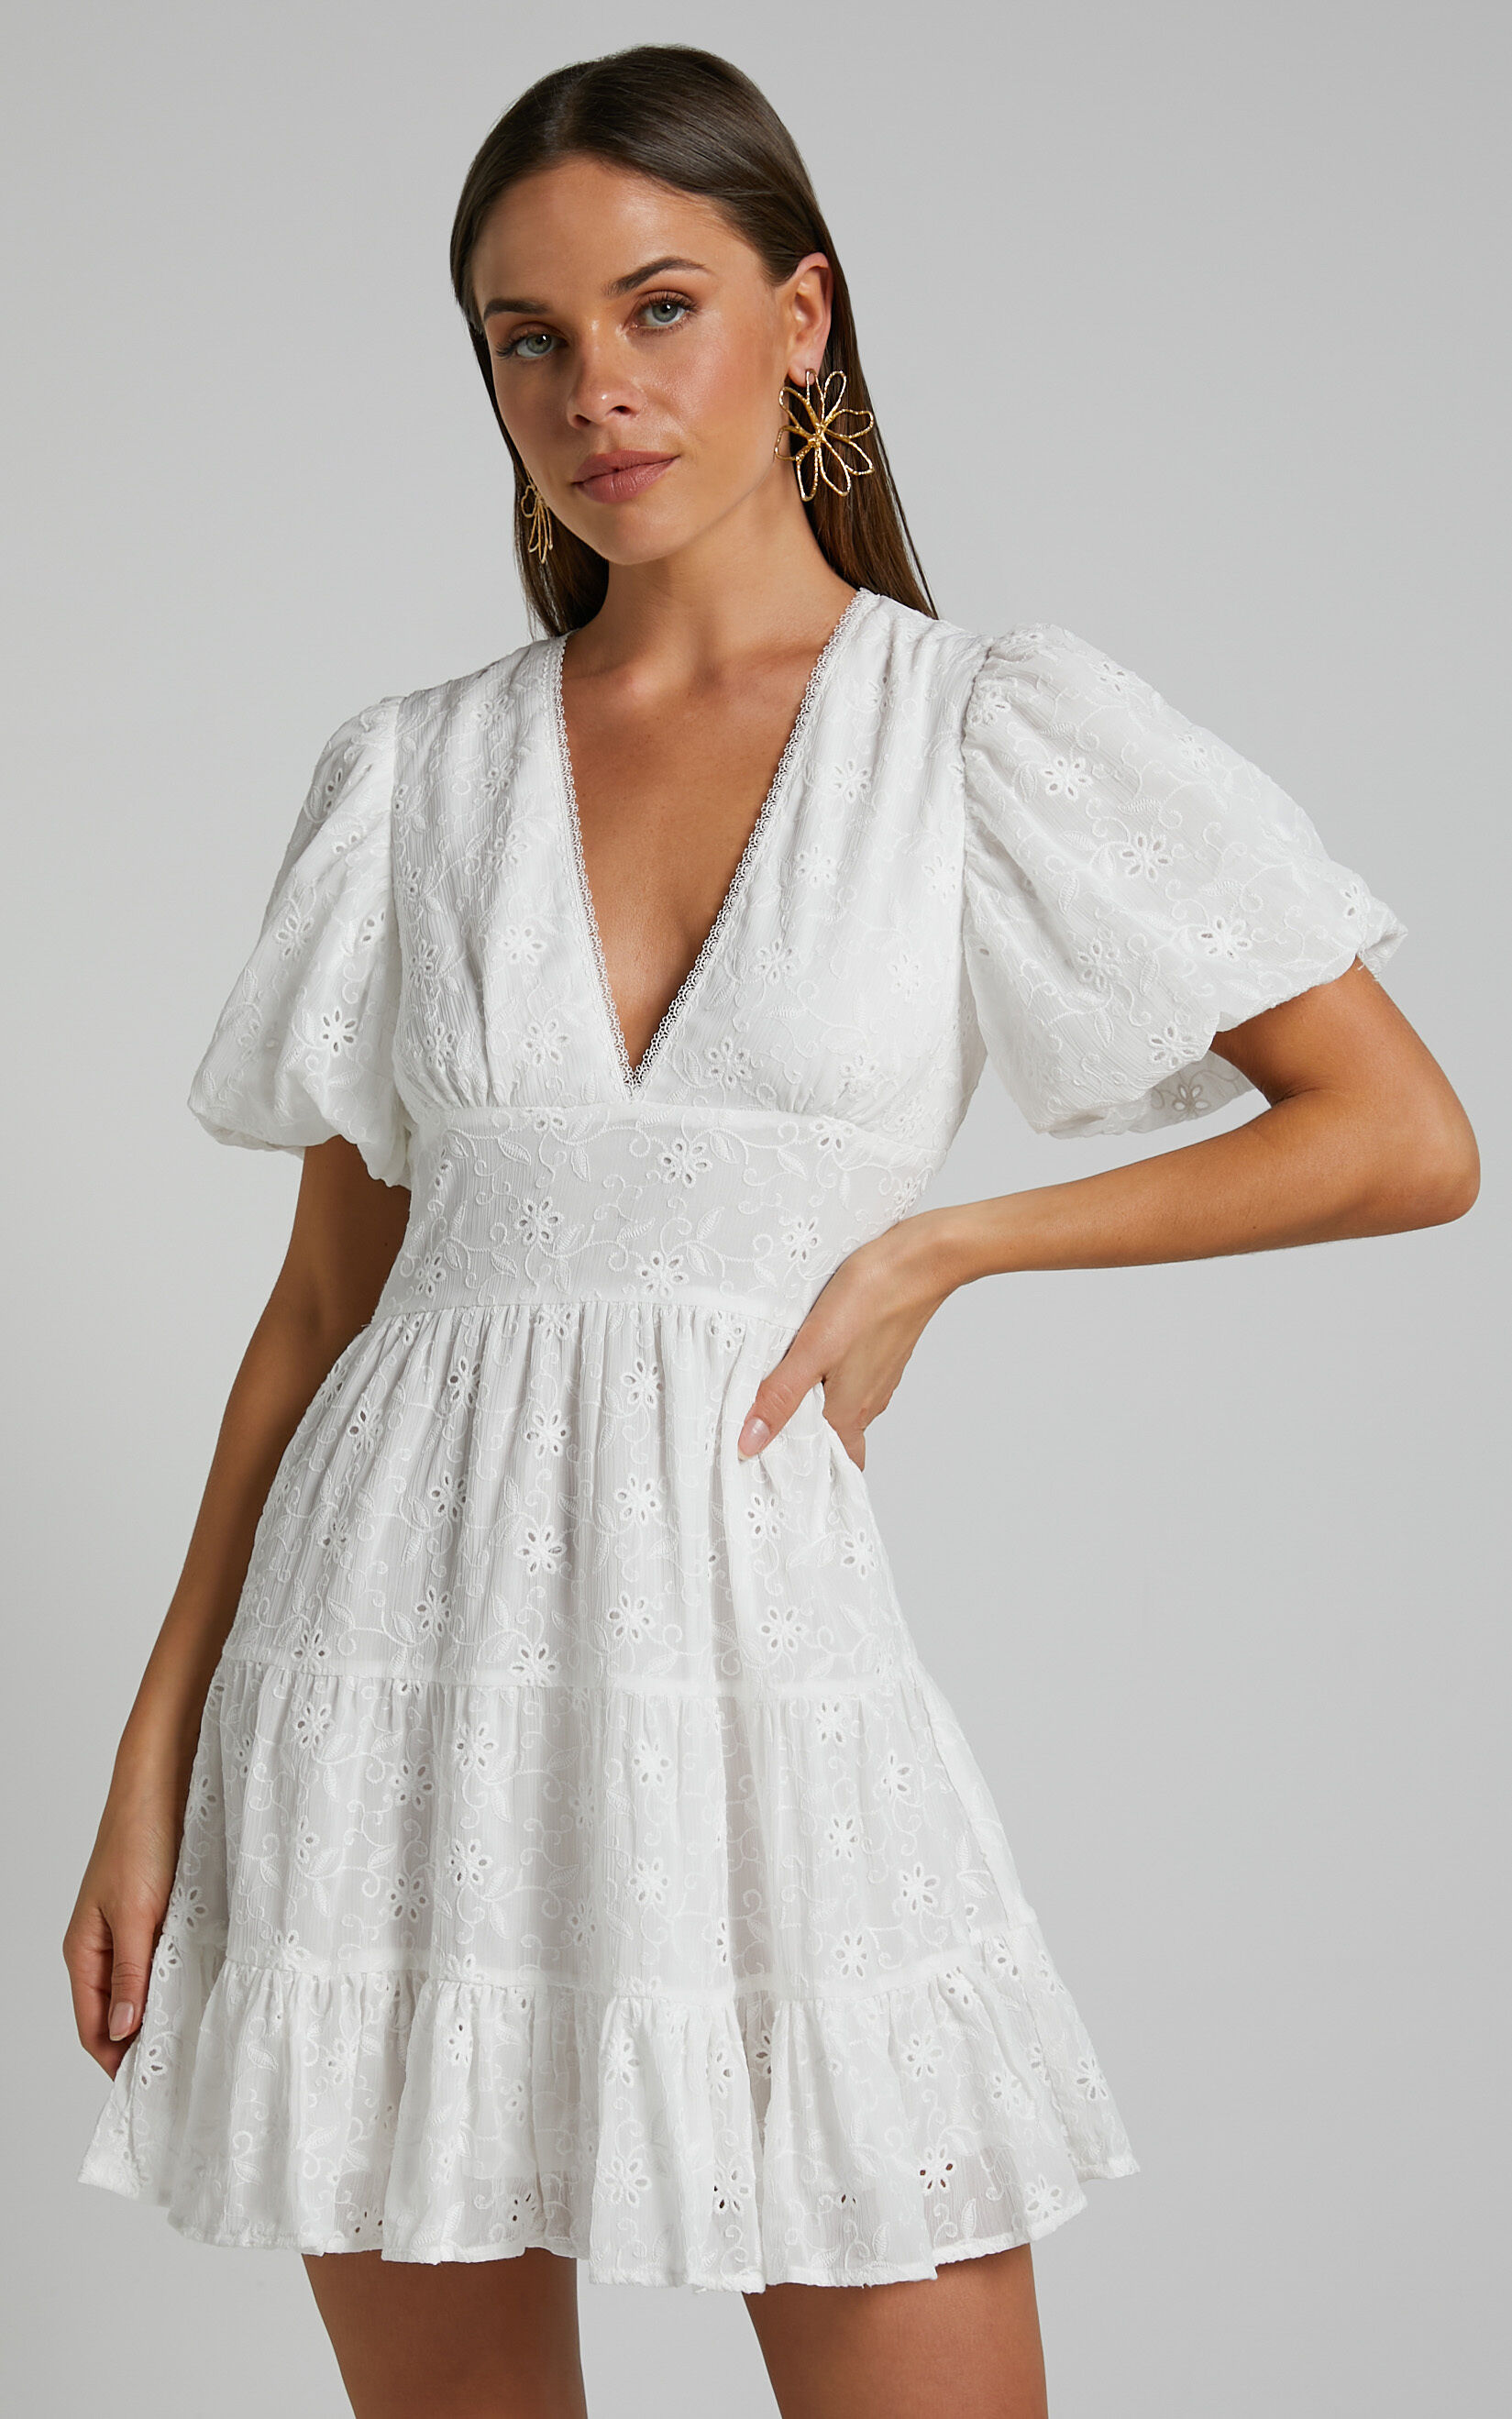 Valiery Lace Overlay Sheer Detail Mini Dress in Ivory - 04, WHT1, super-hi-res image number null